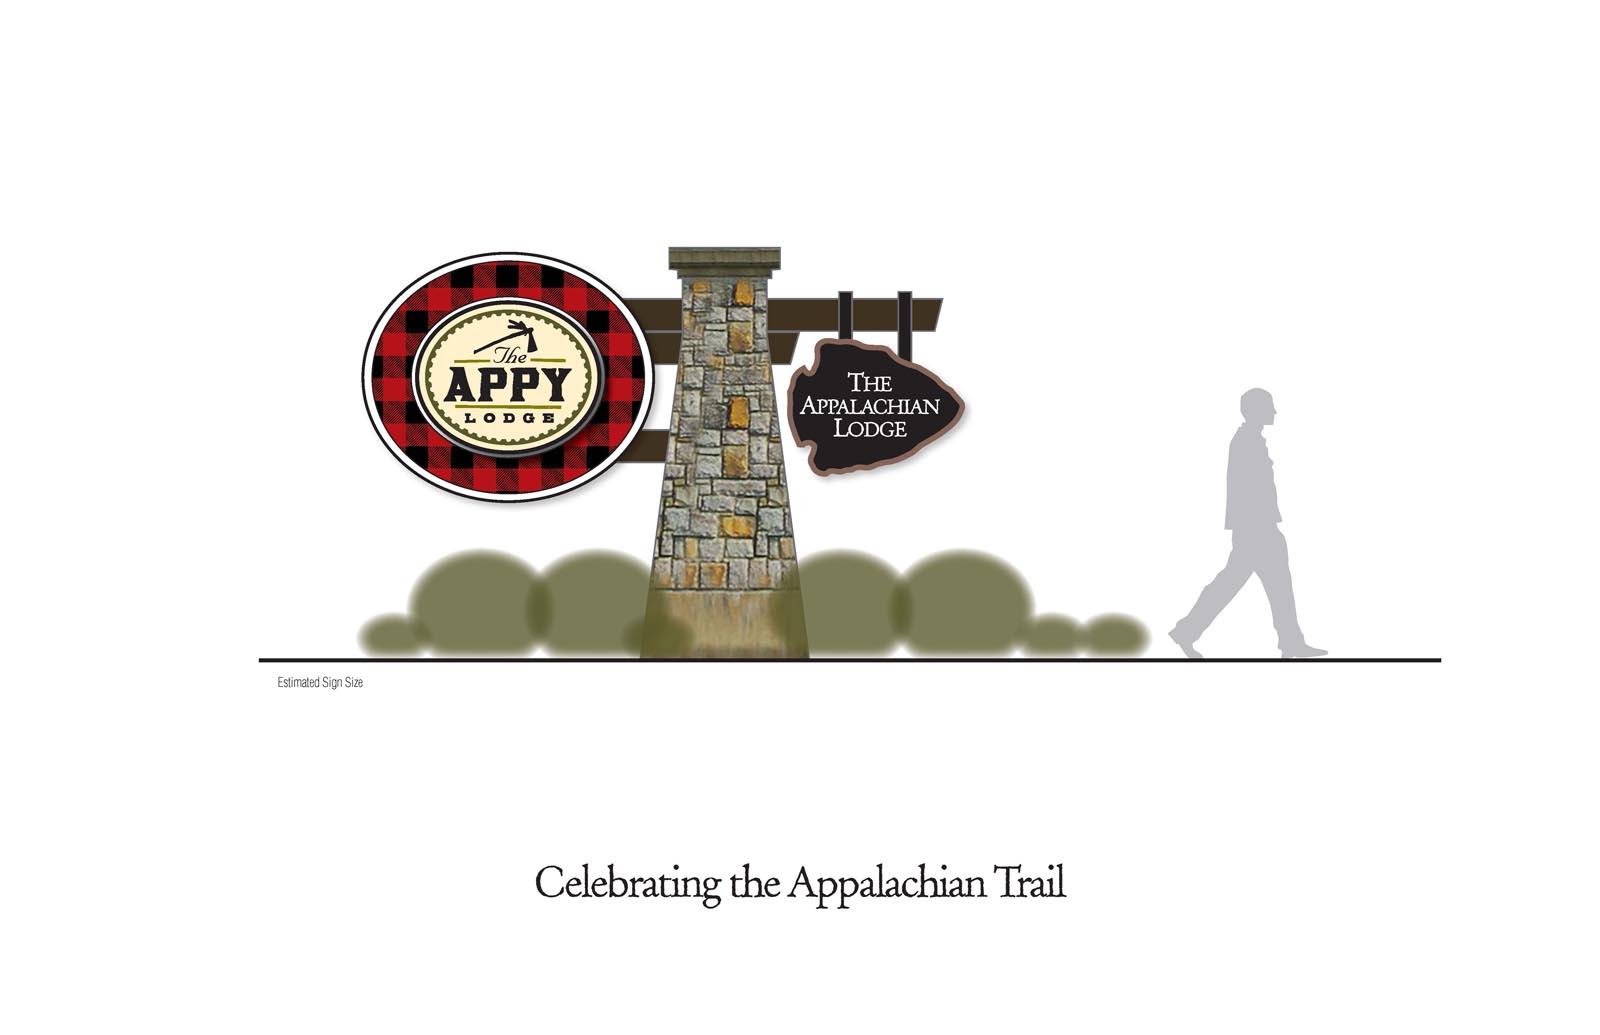 The Appy Lodge